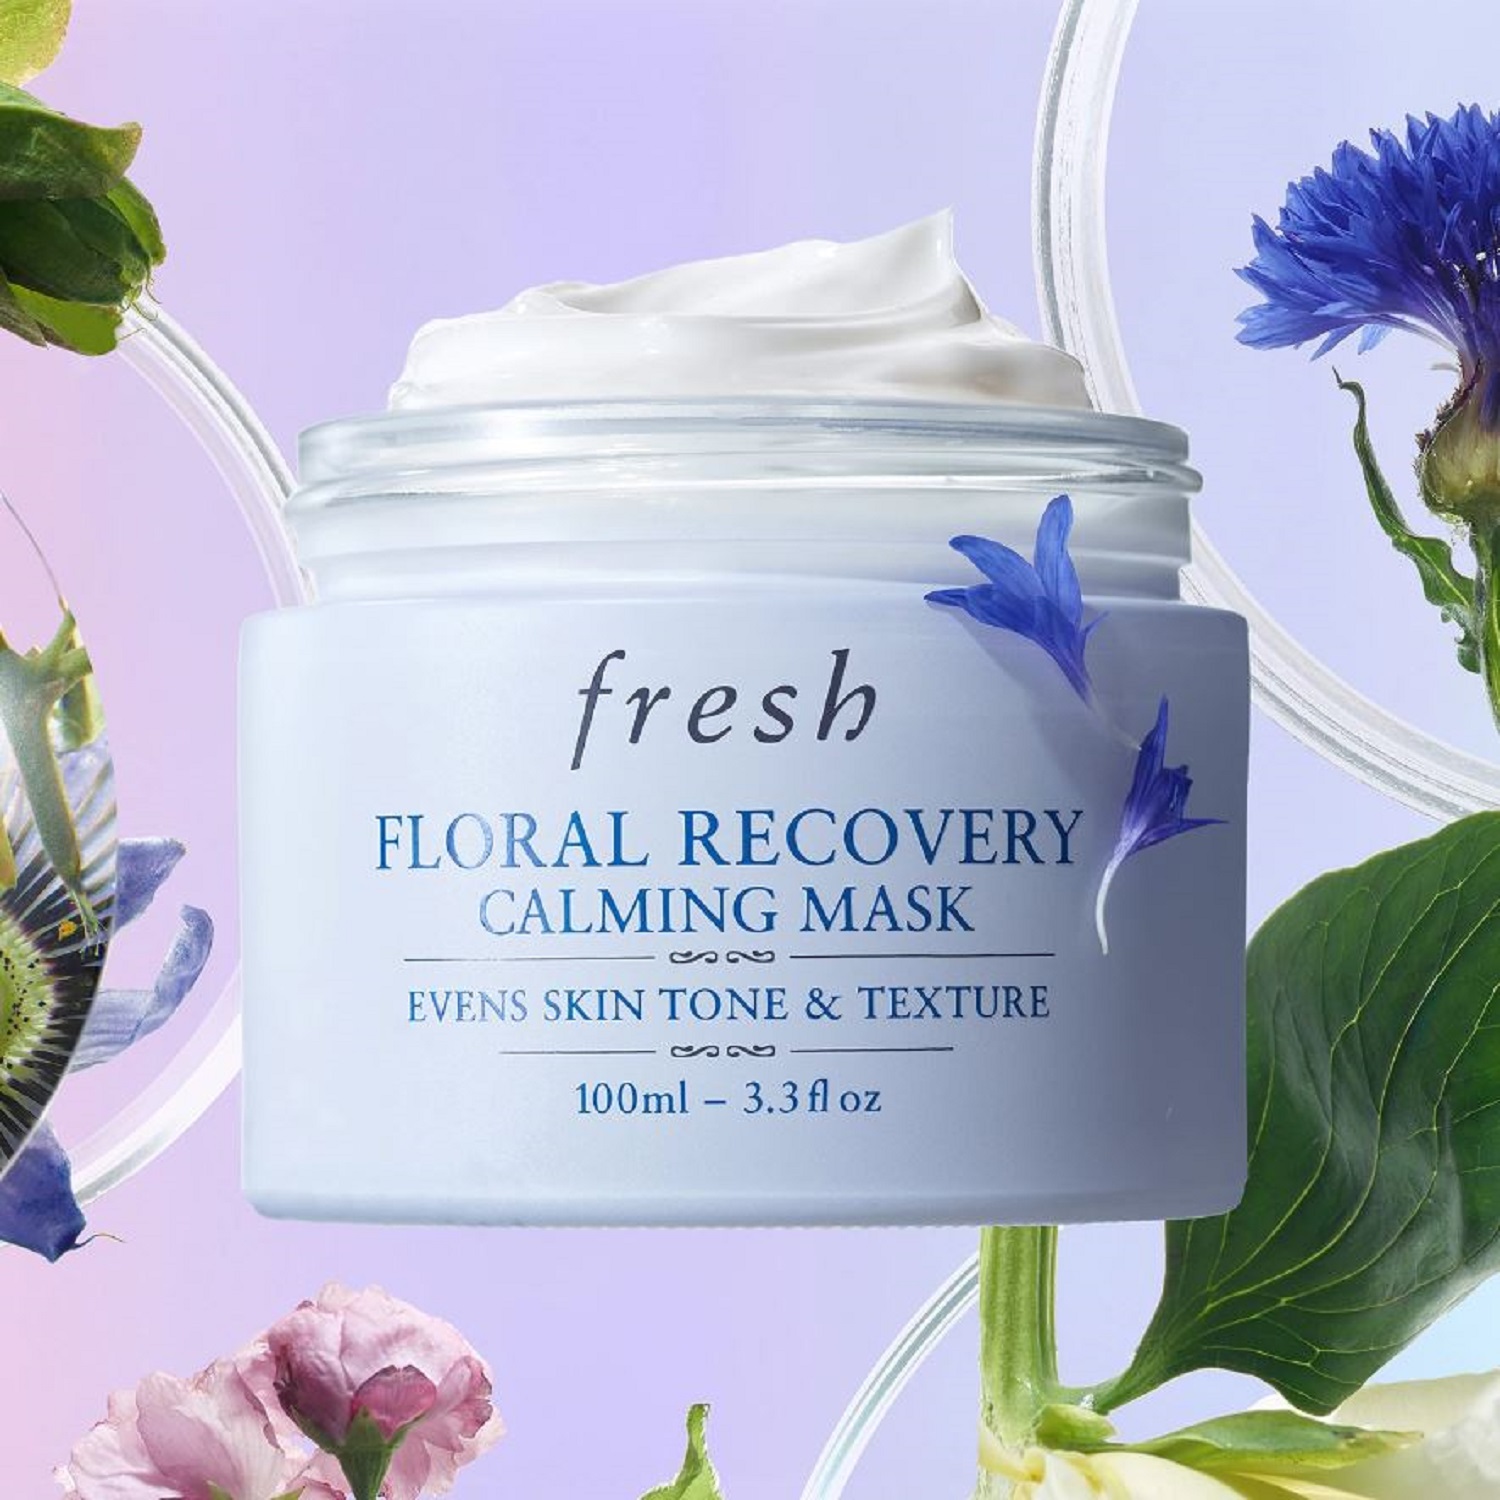 FLORAL RECOVERY REDNESS REDUCING OVERNIGHT MASK (MASCARILLA FACIAL)